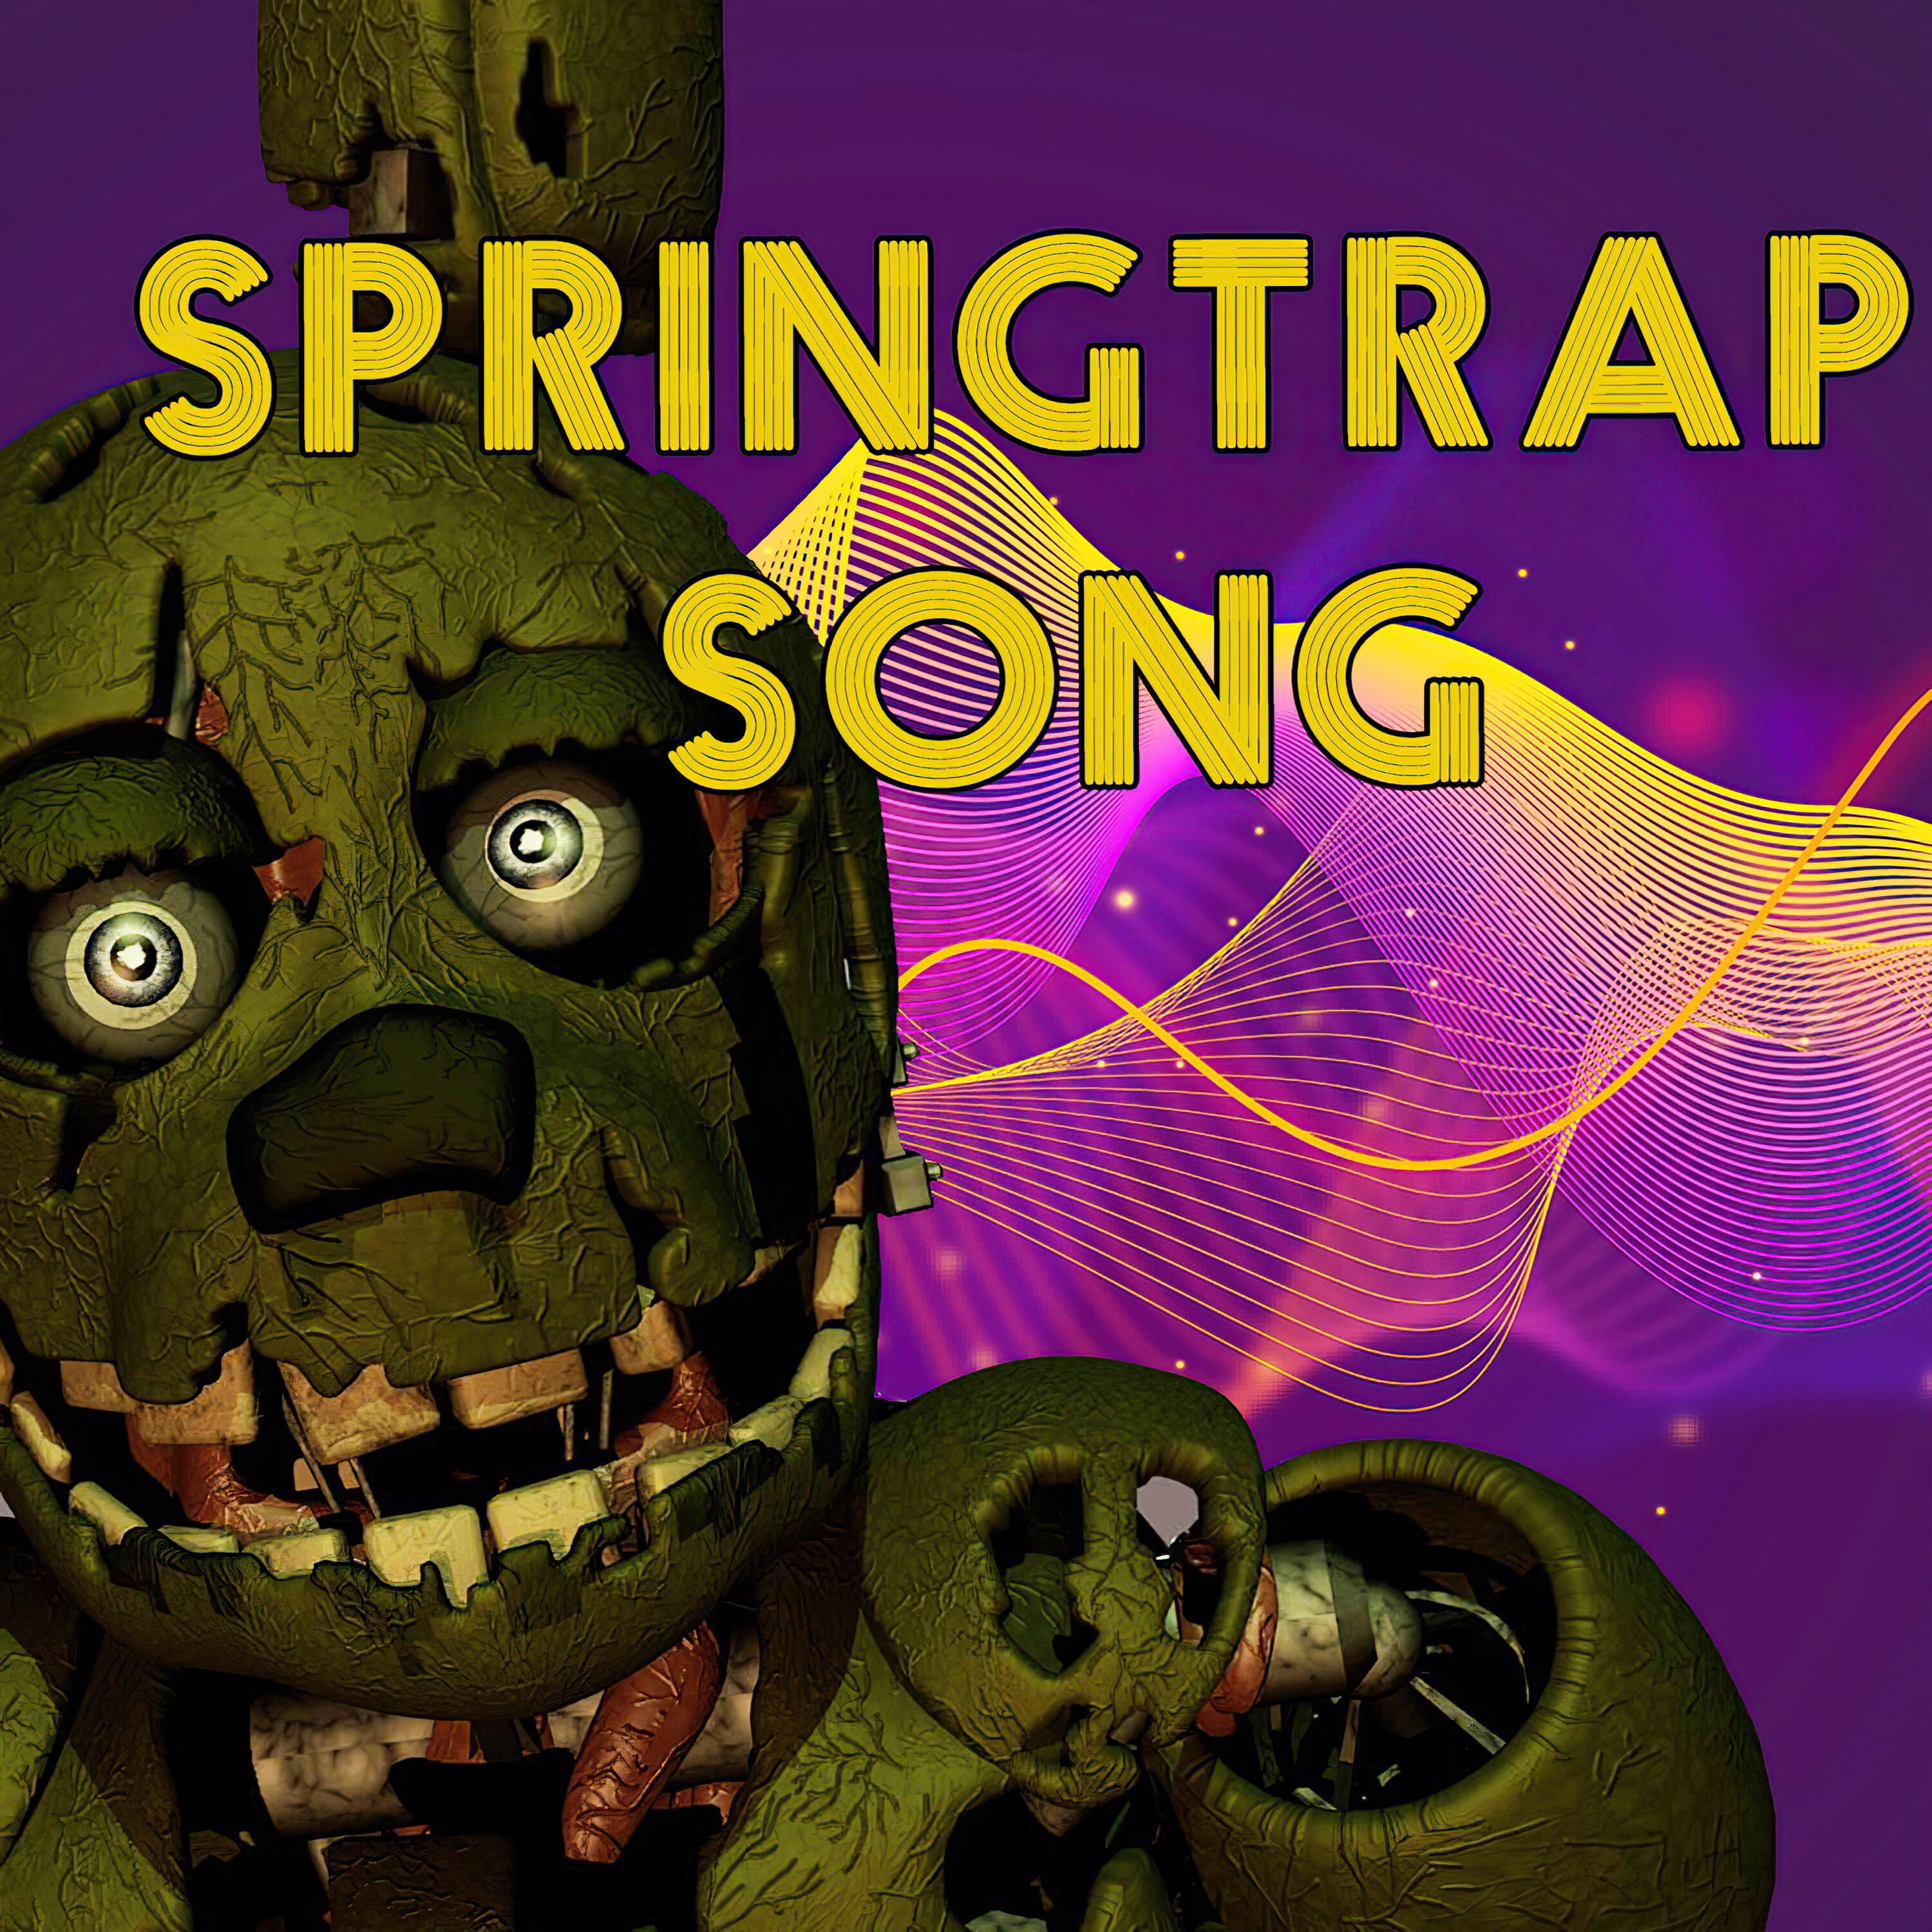 iTownGameplay - Springtrap Song - 